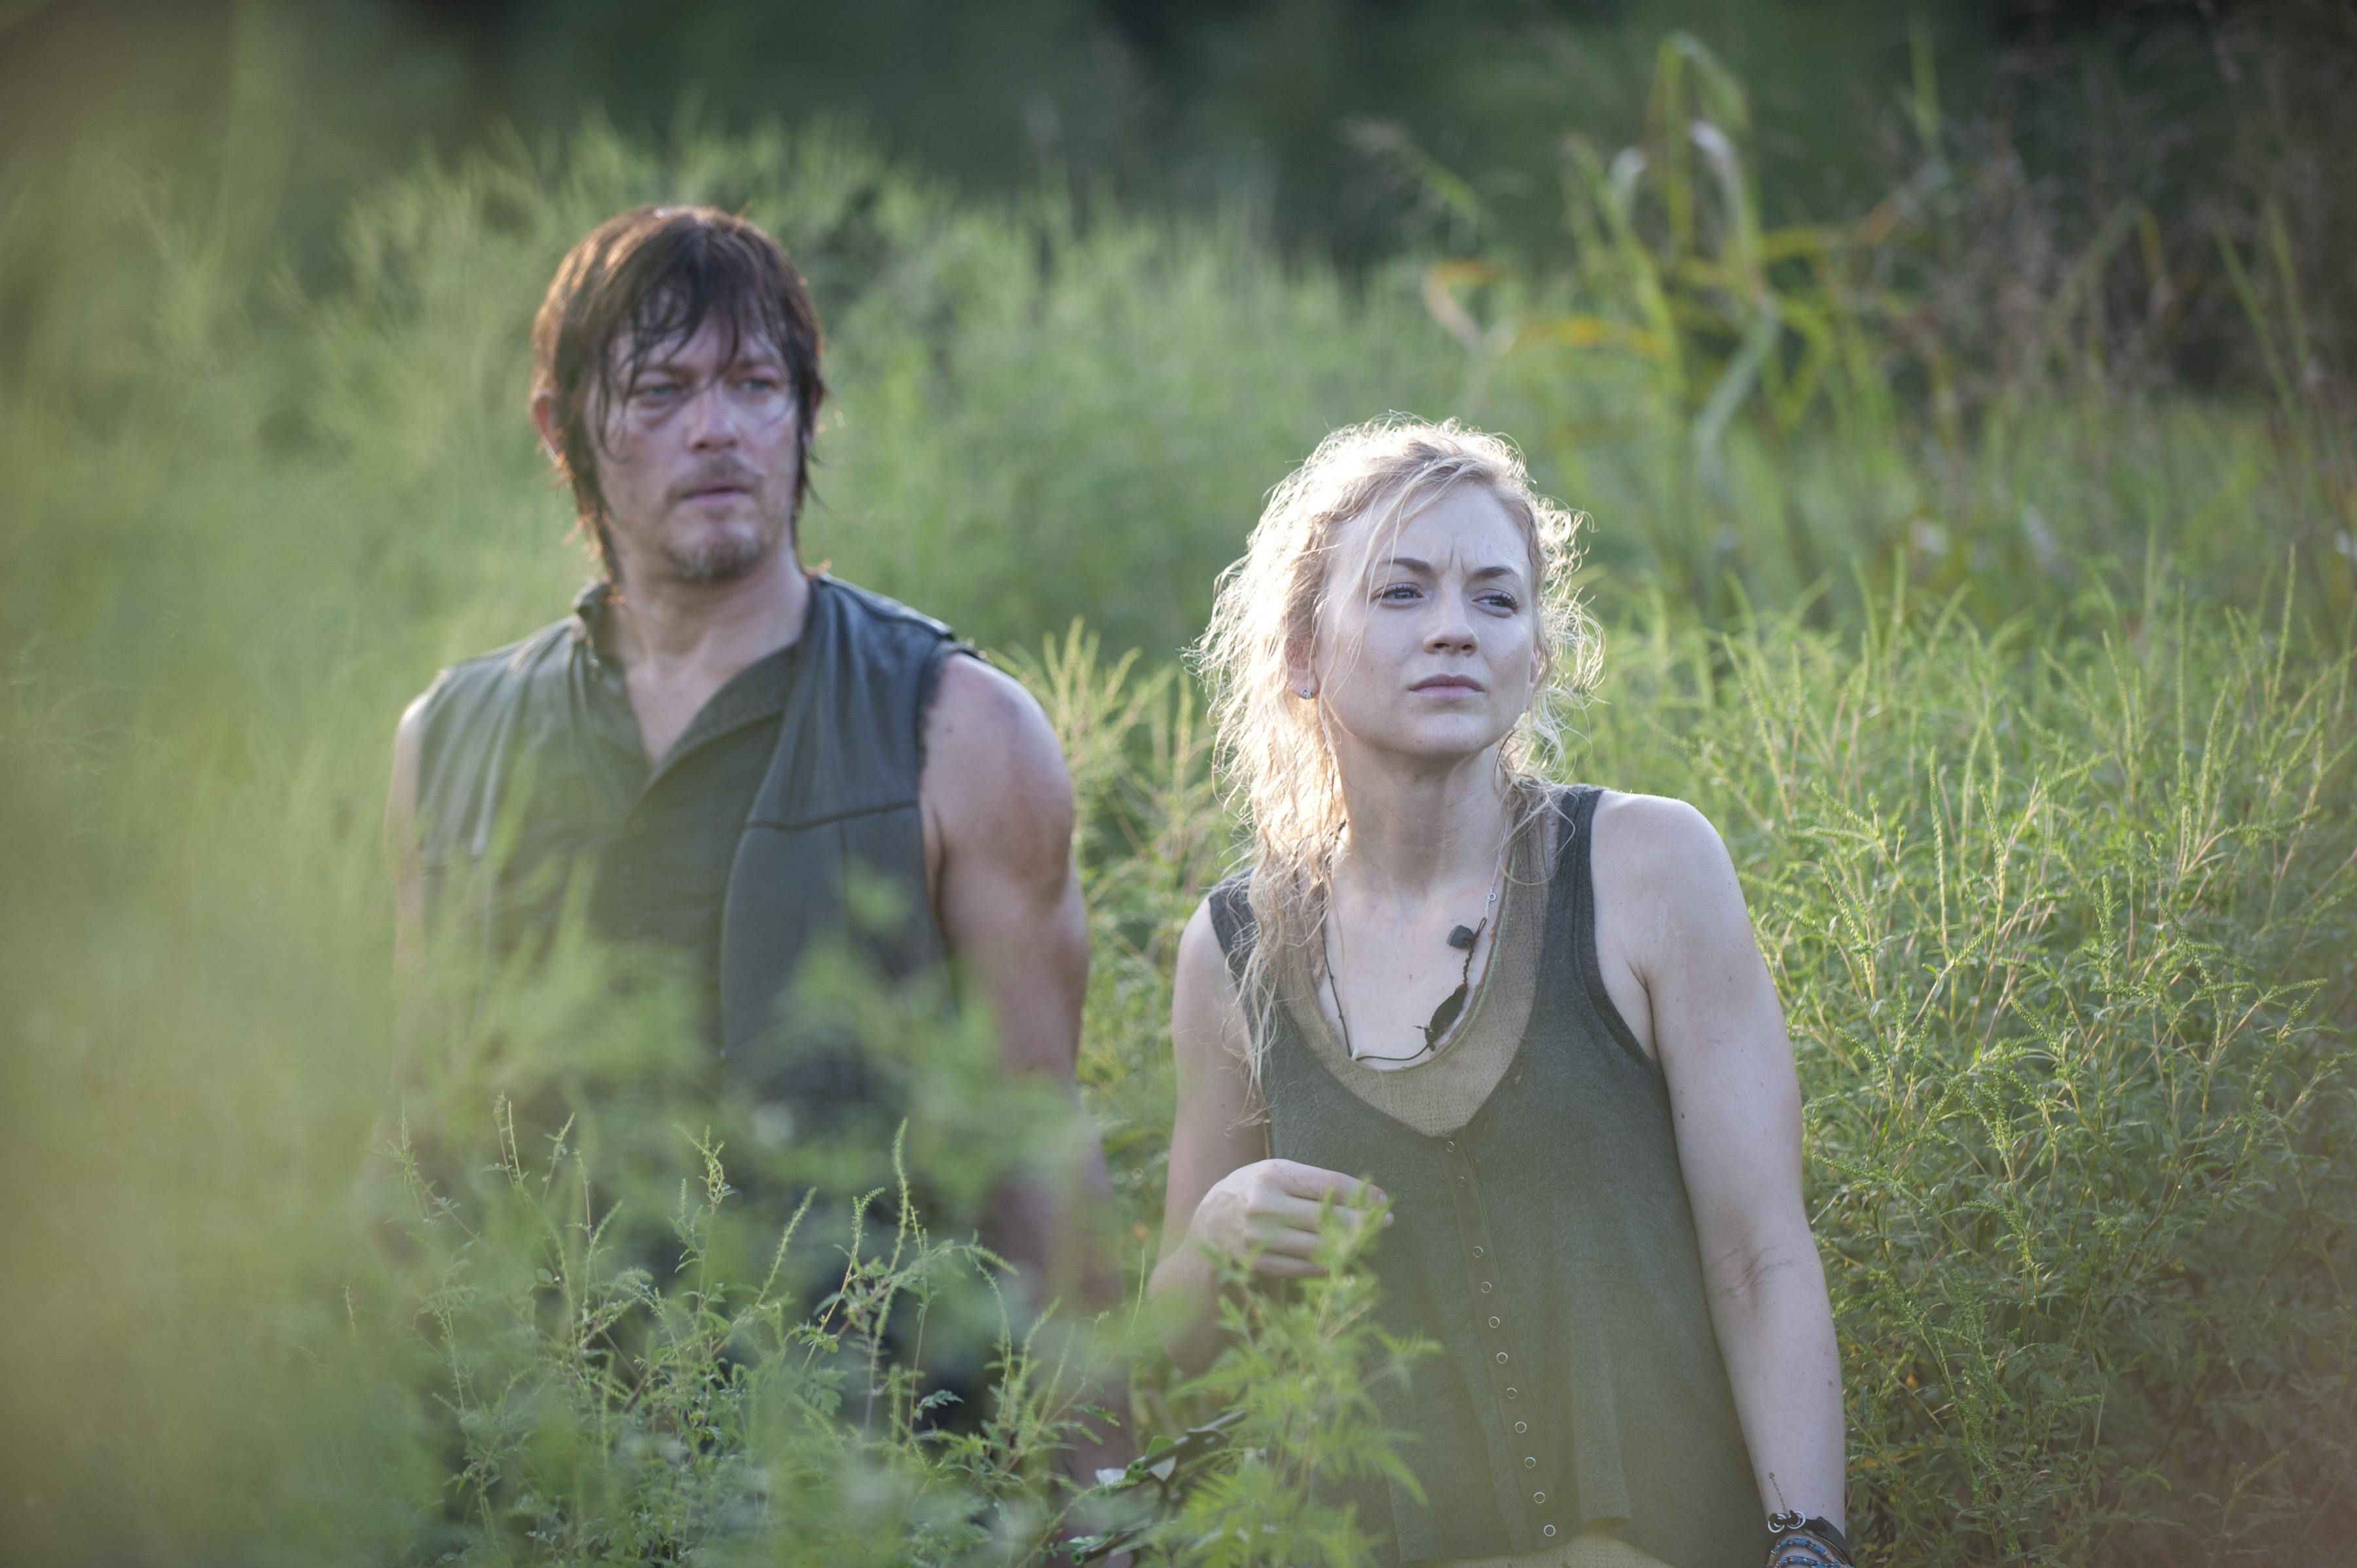 http://img1.wikia.nocookie.net/__cb20140216120403/walkingdead/images/d/df/Inmates_Daryl_and_Beth.png